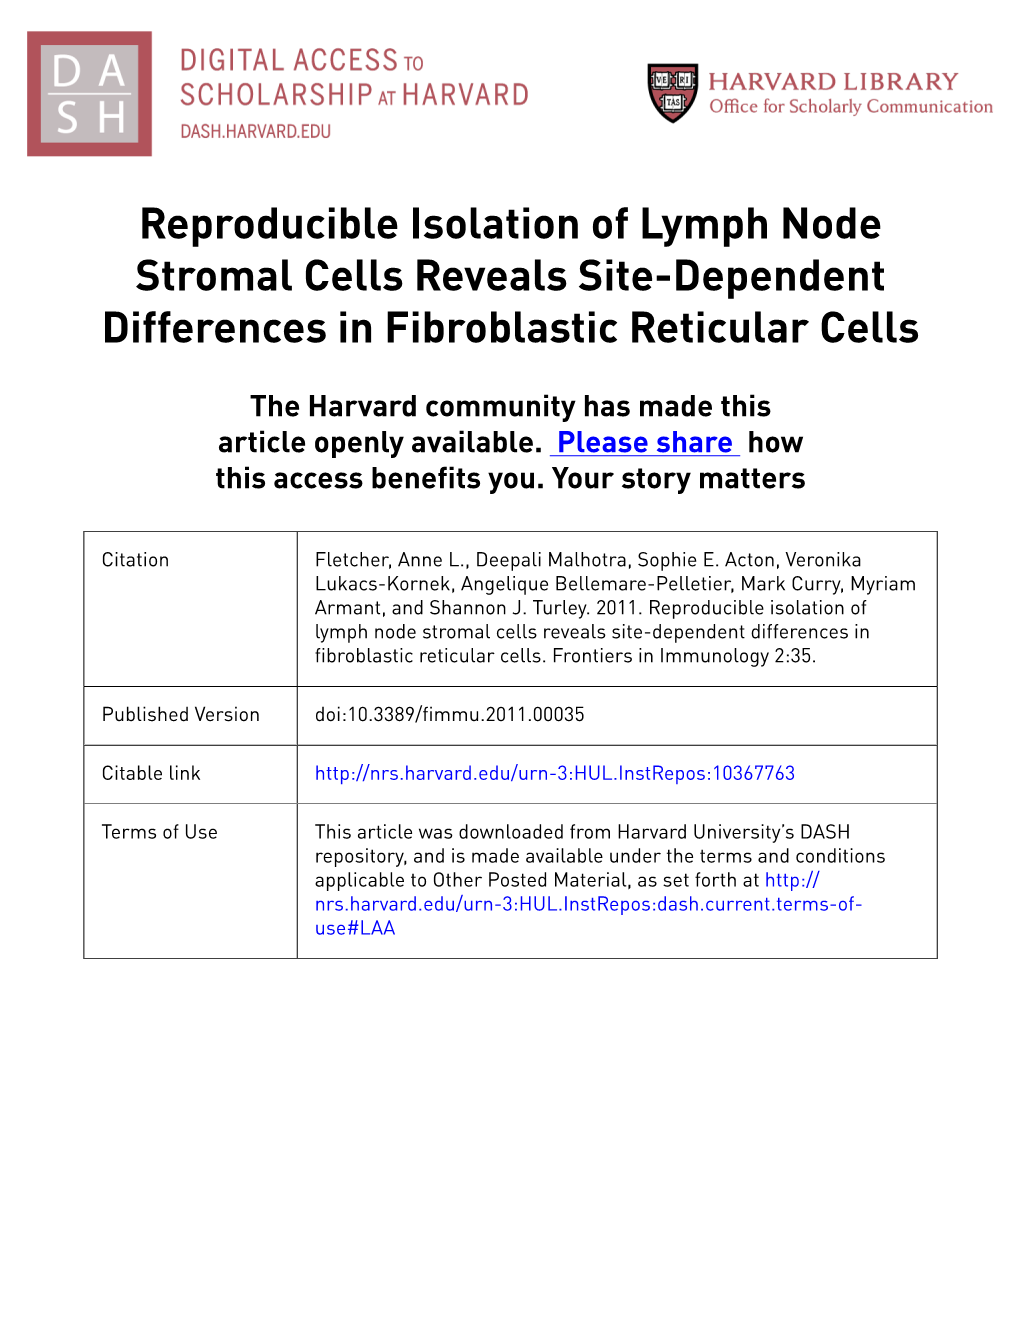 Reproducible Isolation of Lymph Node Stromal Cells Reveals Site-Dependent Differences in Fibroblastic Reticular Cells